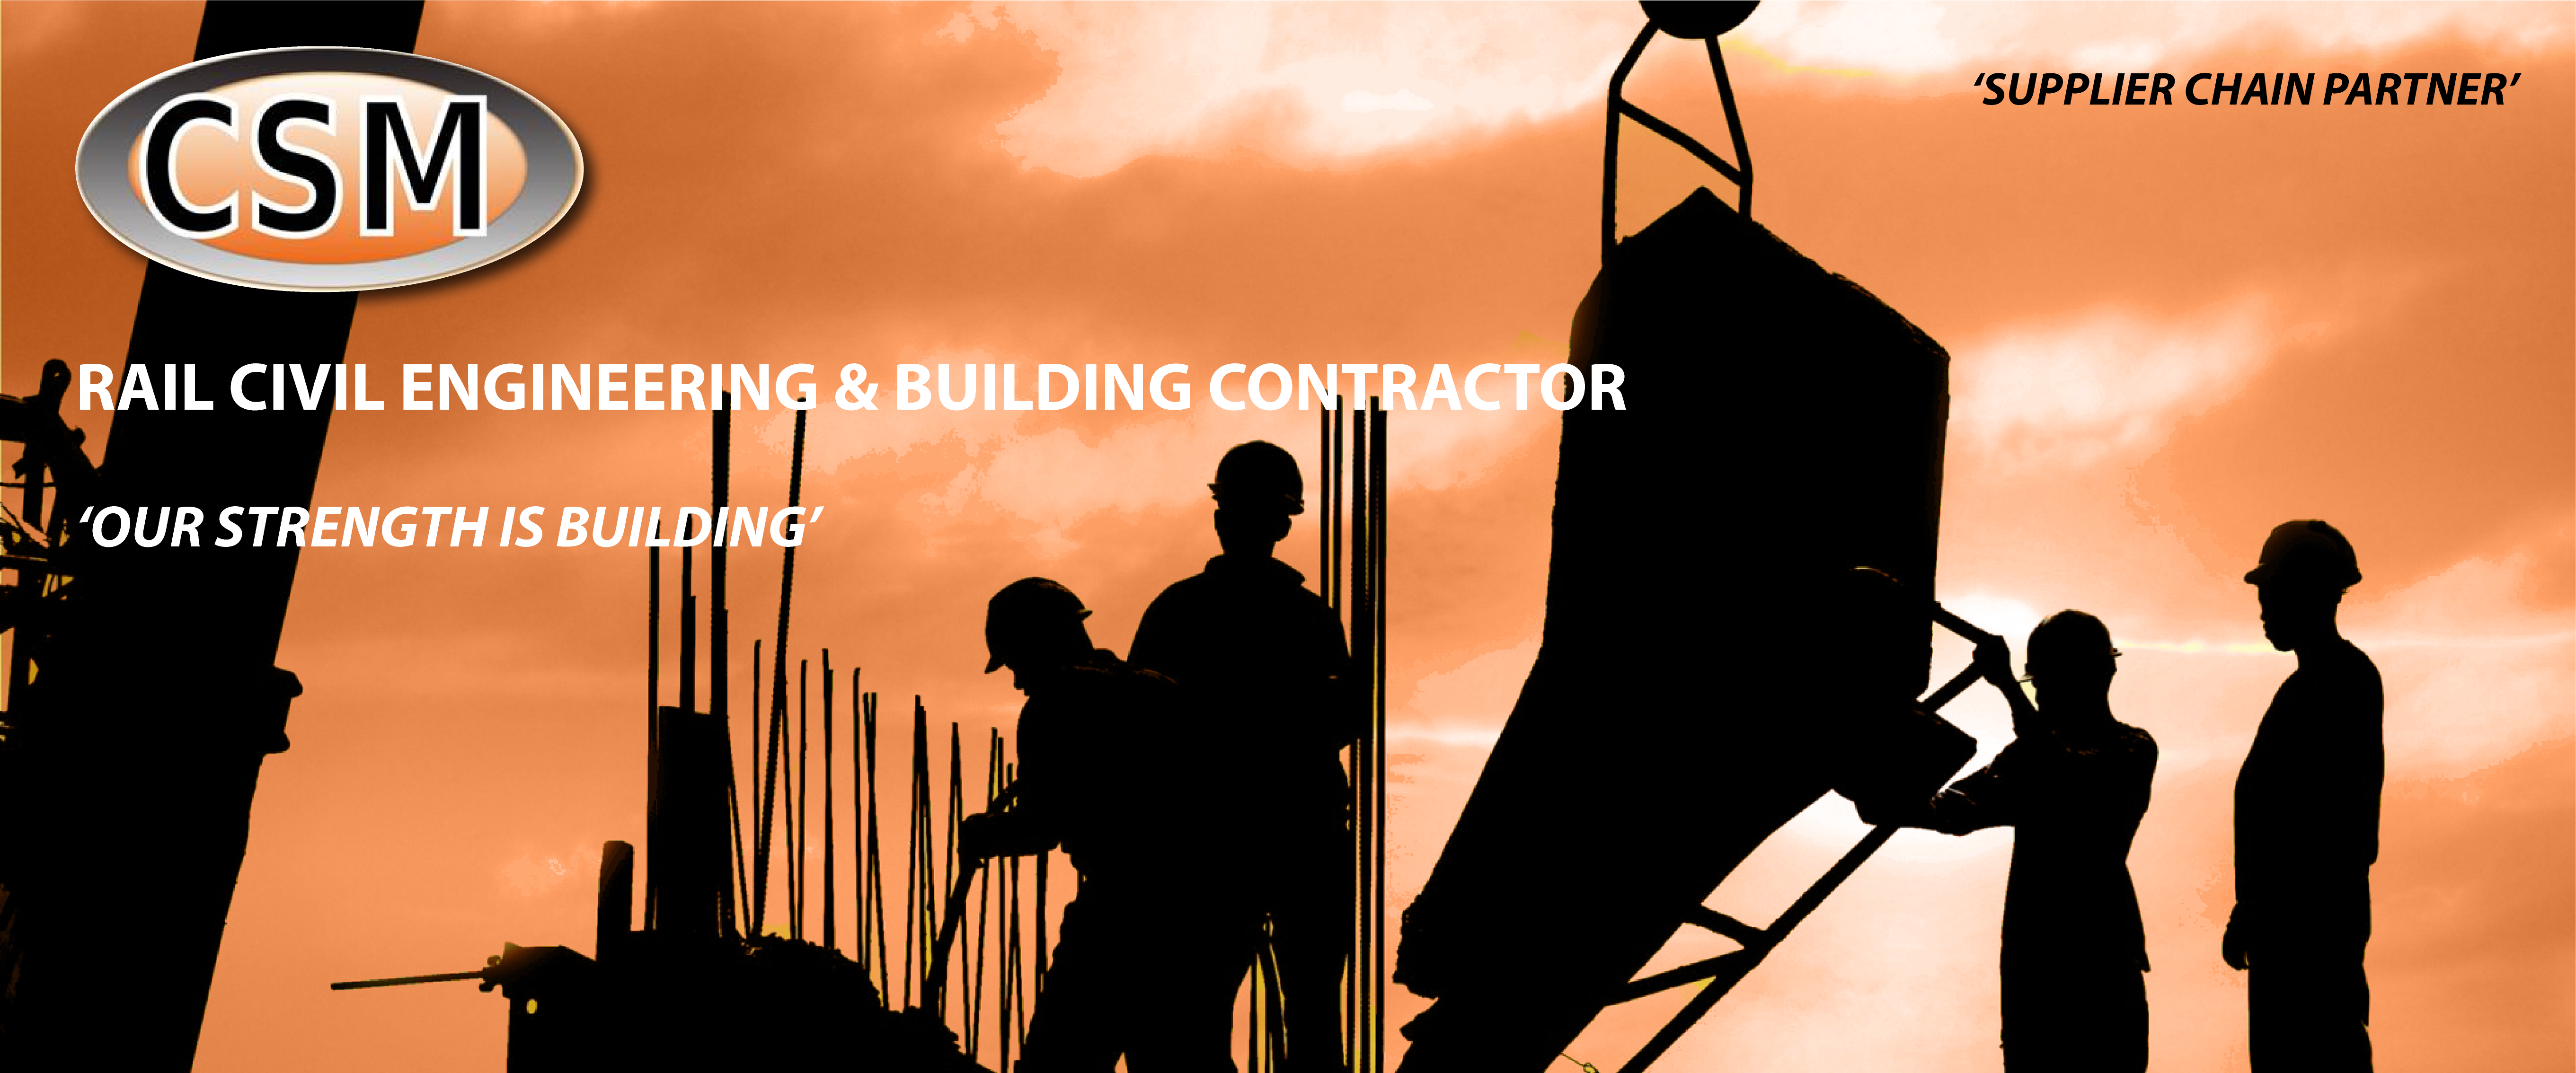 Rail Civil Engineering and Building Contractor